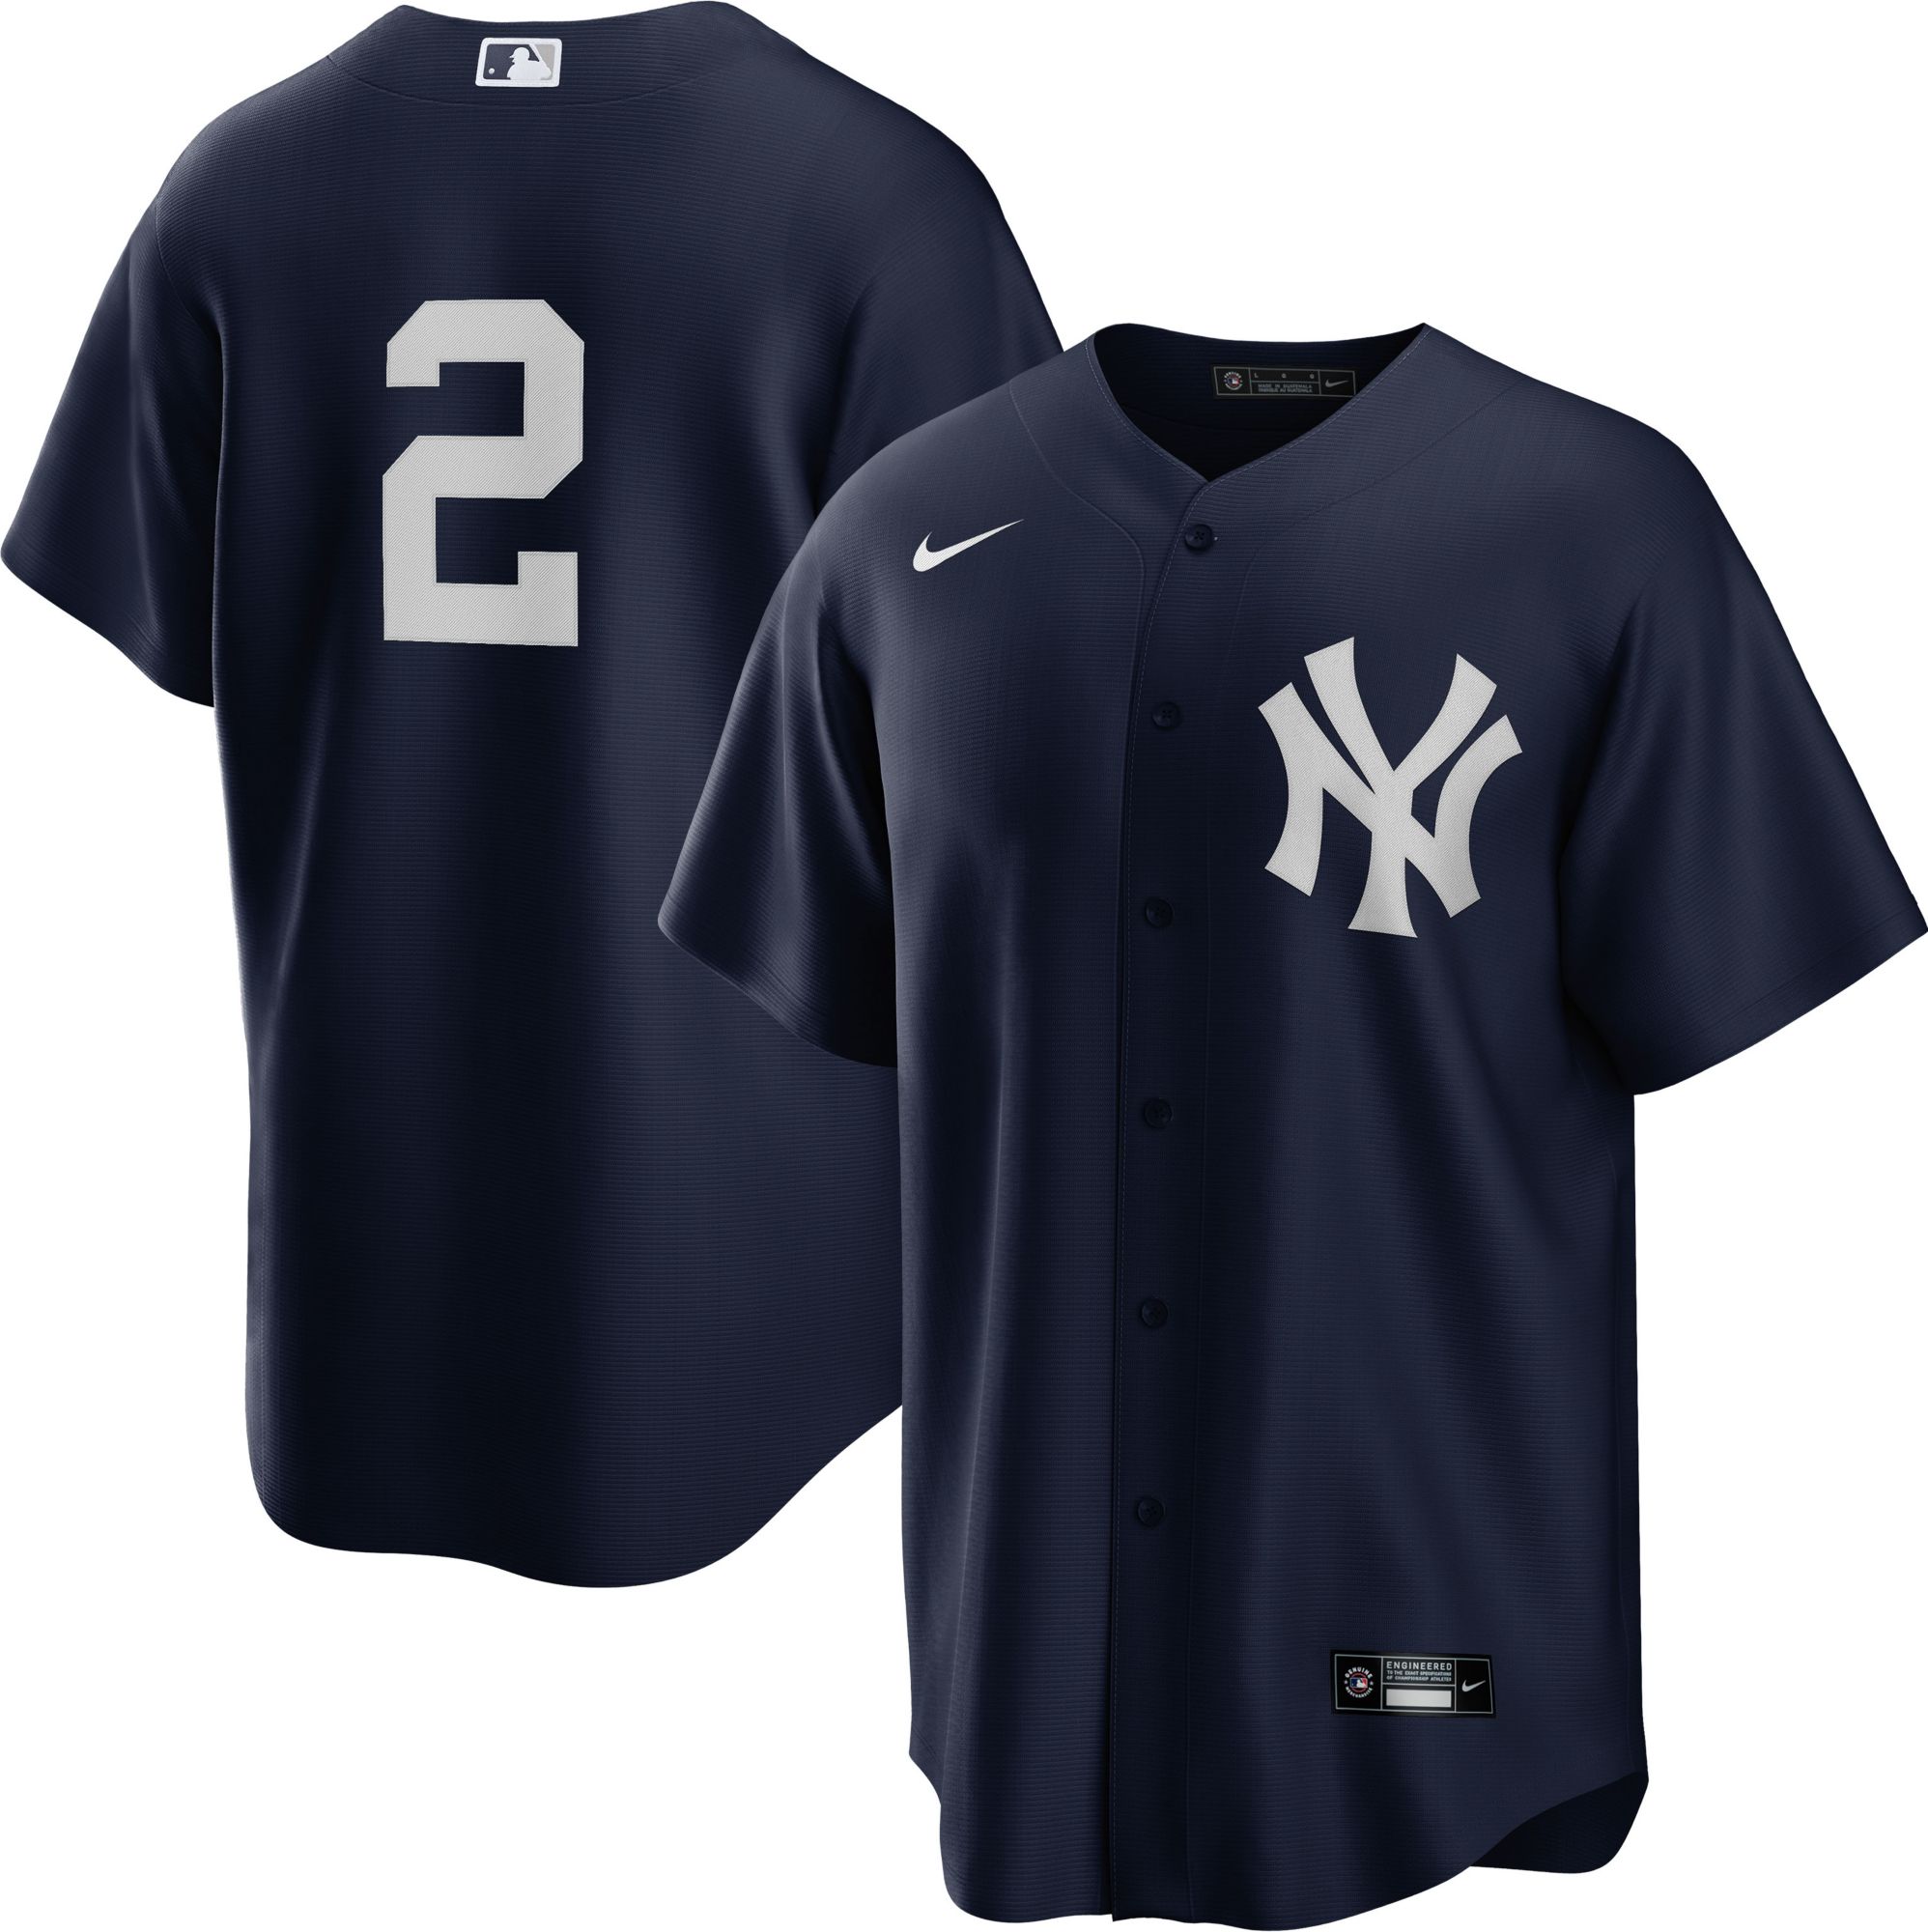 Nike Men's New York Yankees #99 Aaron Judge White Home Authentic Baseball  Team Jersey - Frank's Sports Shop